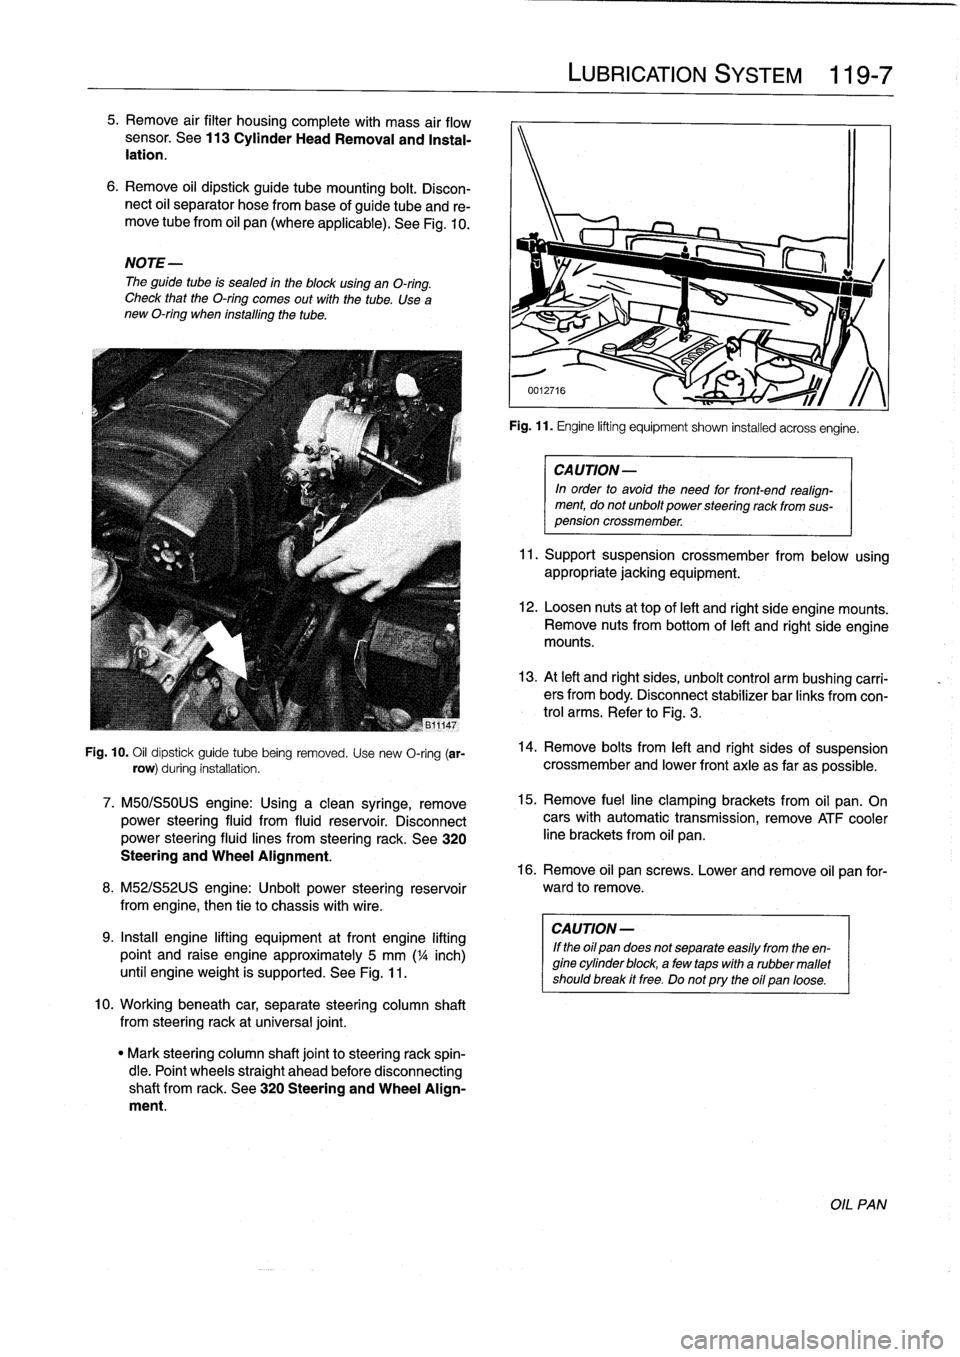 BMW 318i 1997 E36 Workshop Manual 
5
.
Remove
air
filter
housingcomplete
with
mass
air
flow
sensor
.
See113
Cylinder
HeadRemoval
and
Instal-
lation
.

6
.
Remove
oil
dipstick
guide
tube
mounting
bolt
.
Discon-
nect
oil
separator
hose
